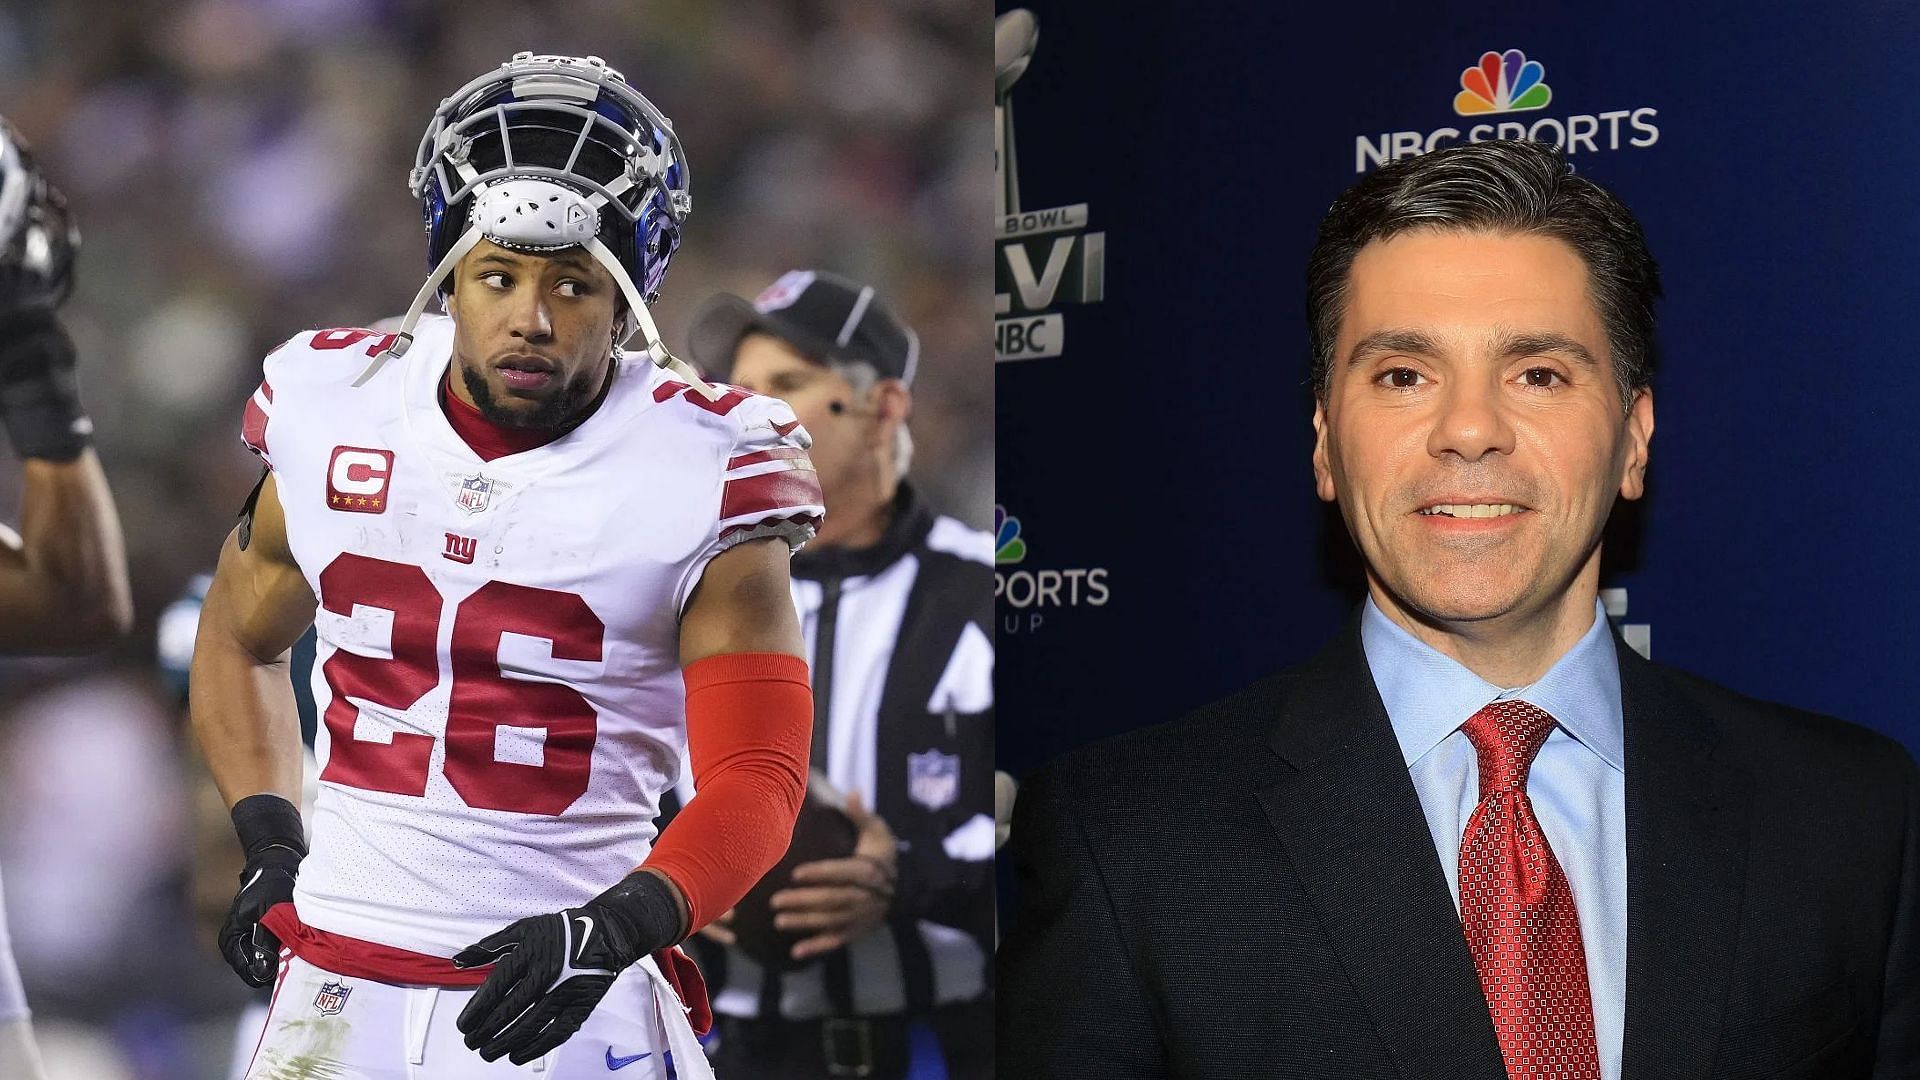 Barkley has called out Mike Florio over his false reporting.